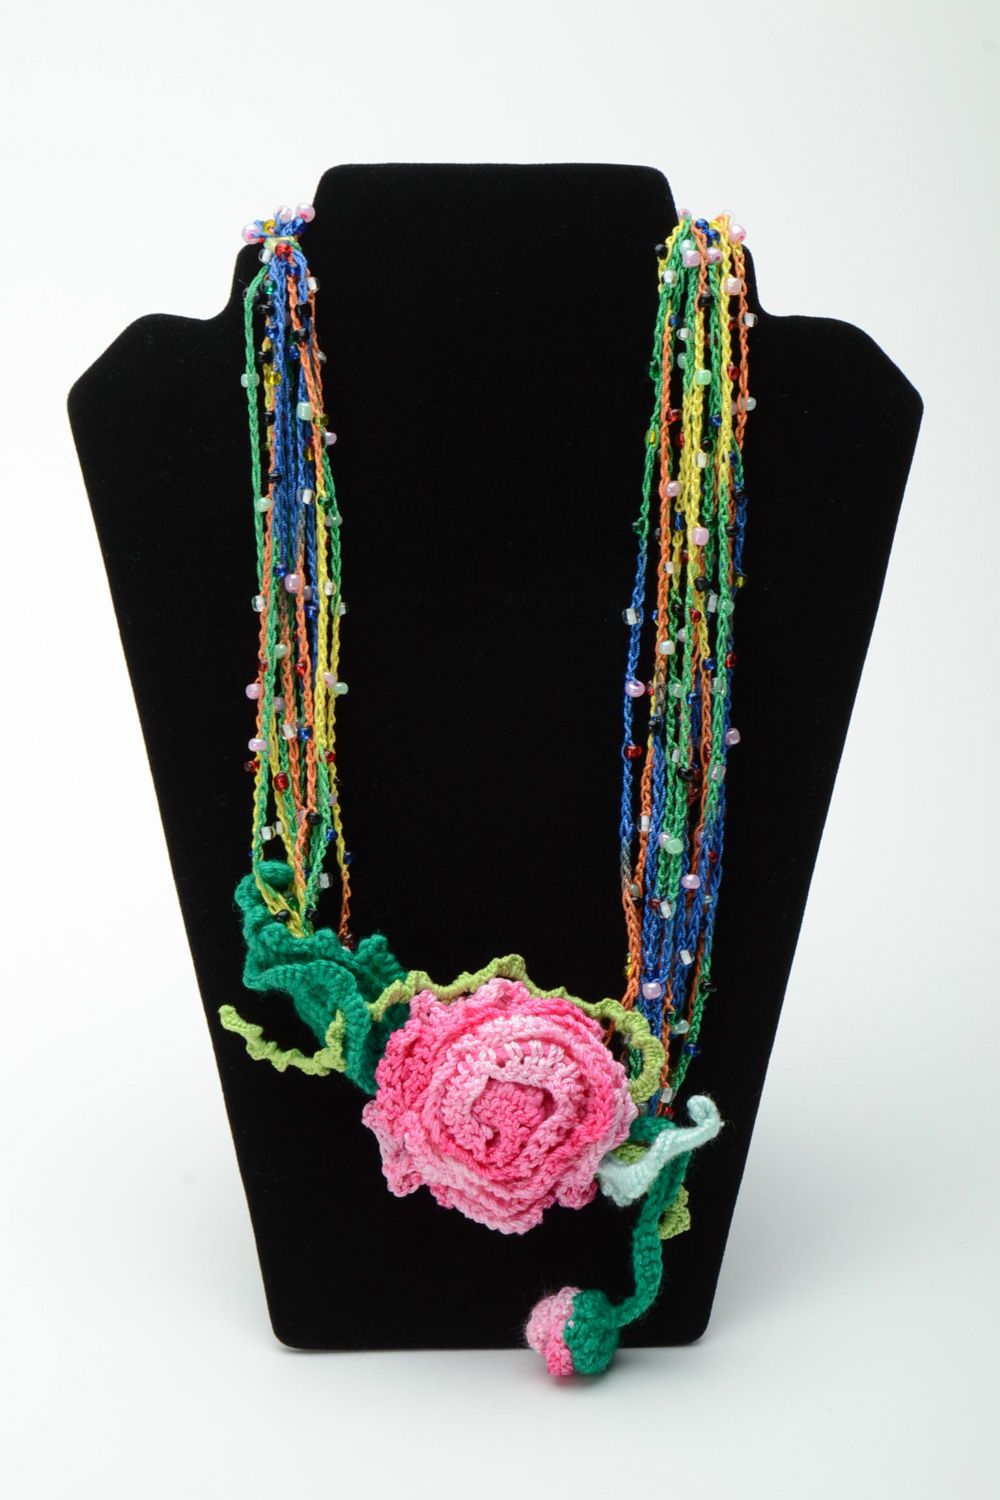 Handmade crochet flower necklace with beads photo 1